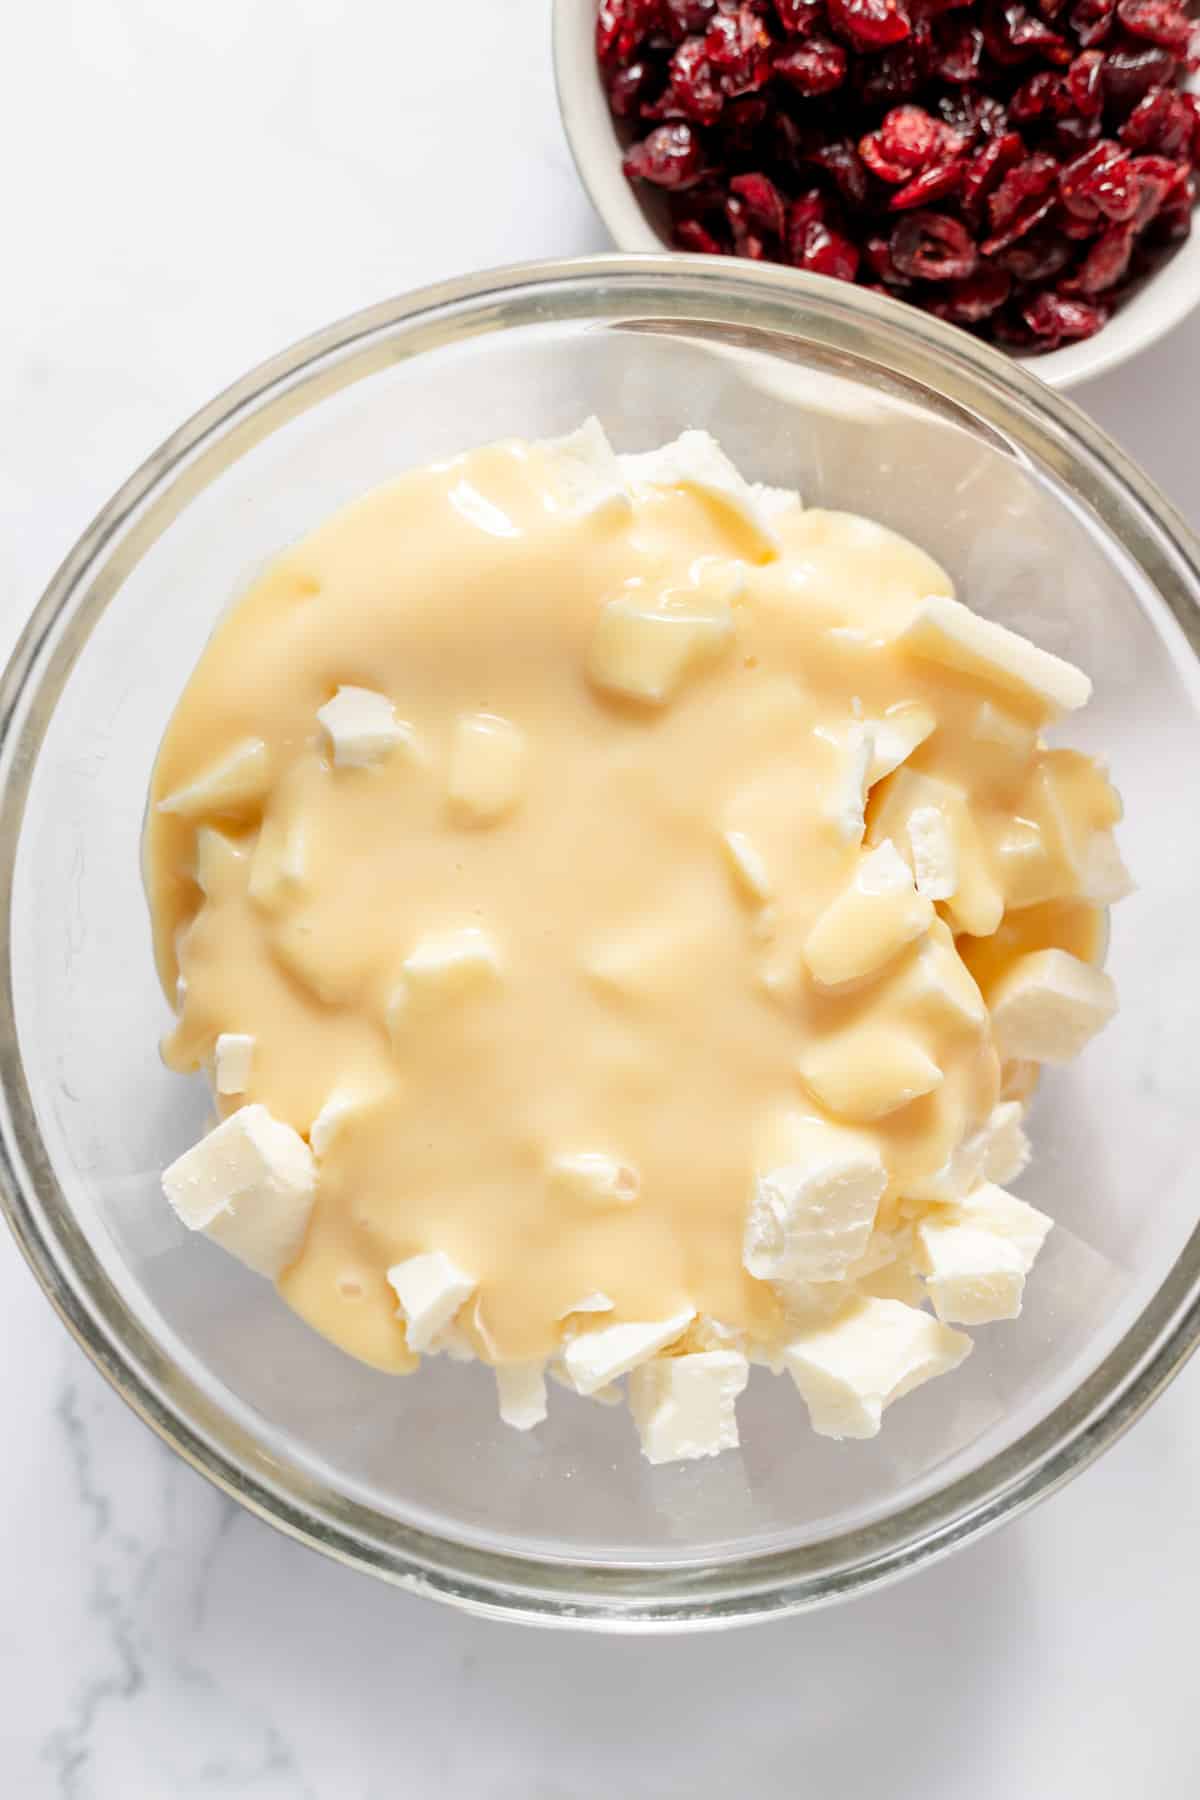 A glass mixing bowl with chopped white chocolate and sweetened condensed milk with a bowl of dried cranberries to the side.